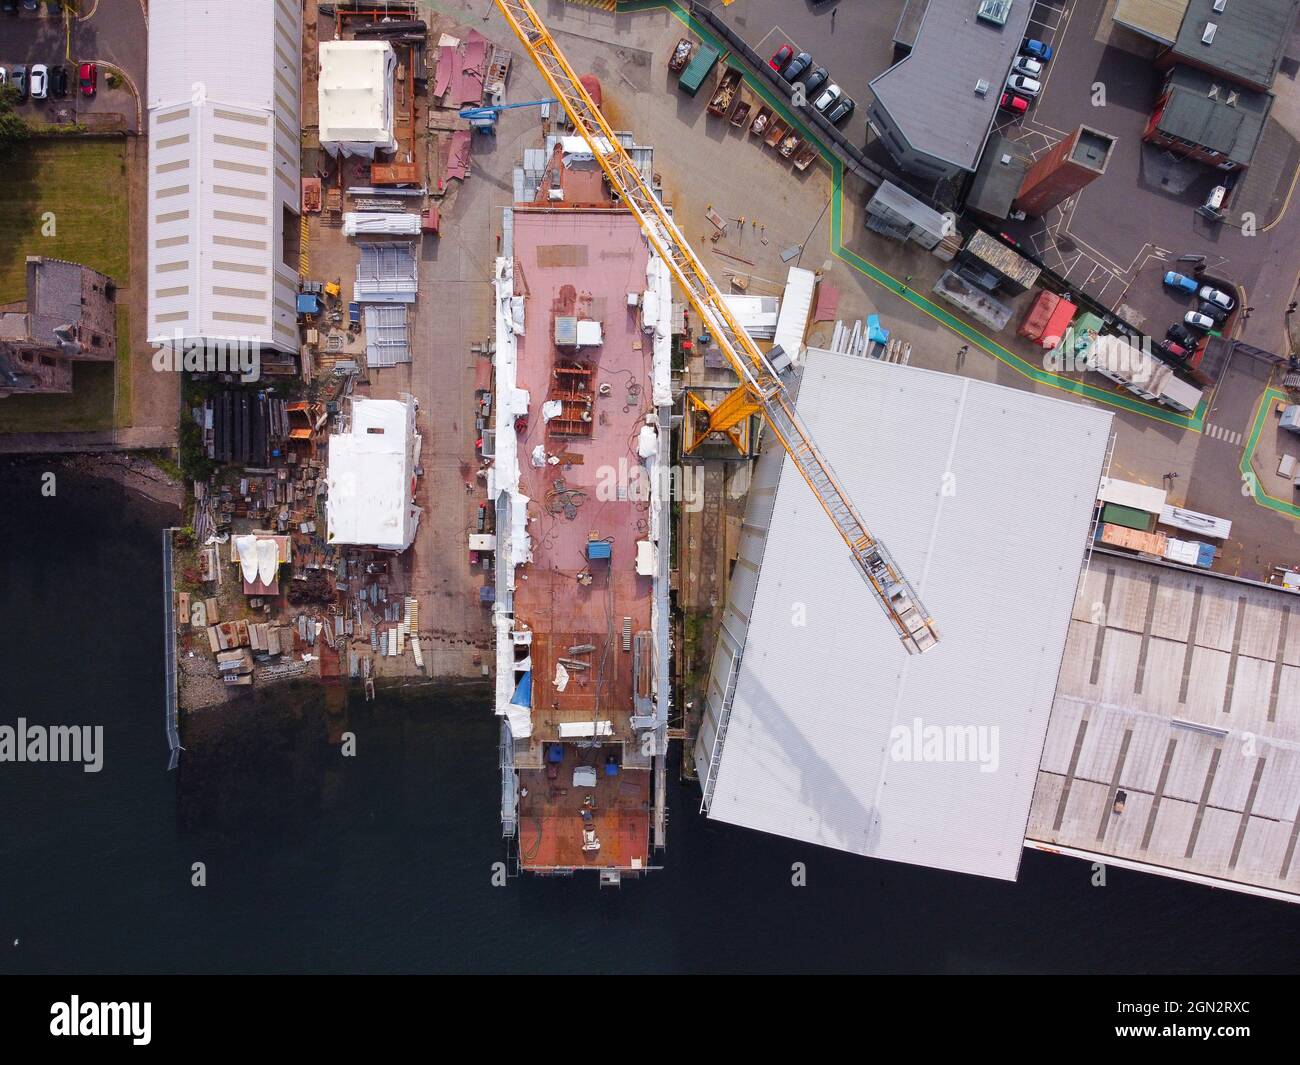 Port Glasgow, 21st Sept 2021. Aerial view of  unnamed ferry Hull 802 under construction at Ferguson Marine shipyard on River Clyde at Port Glasgow Stock Photo